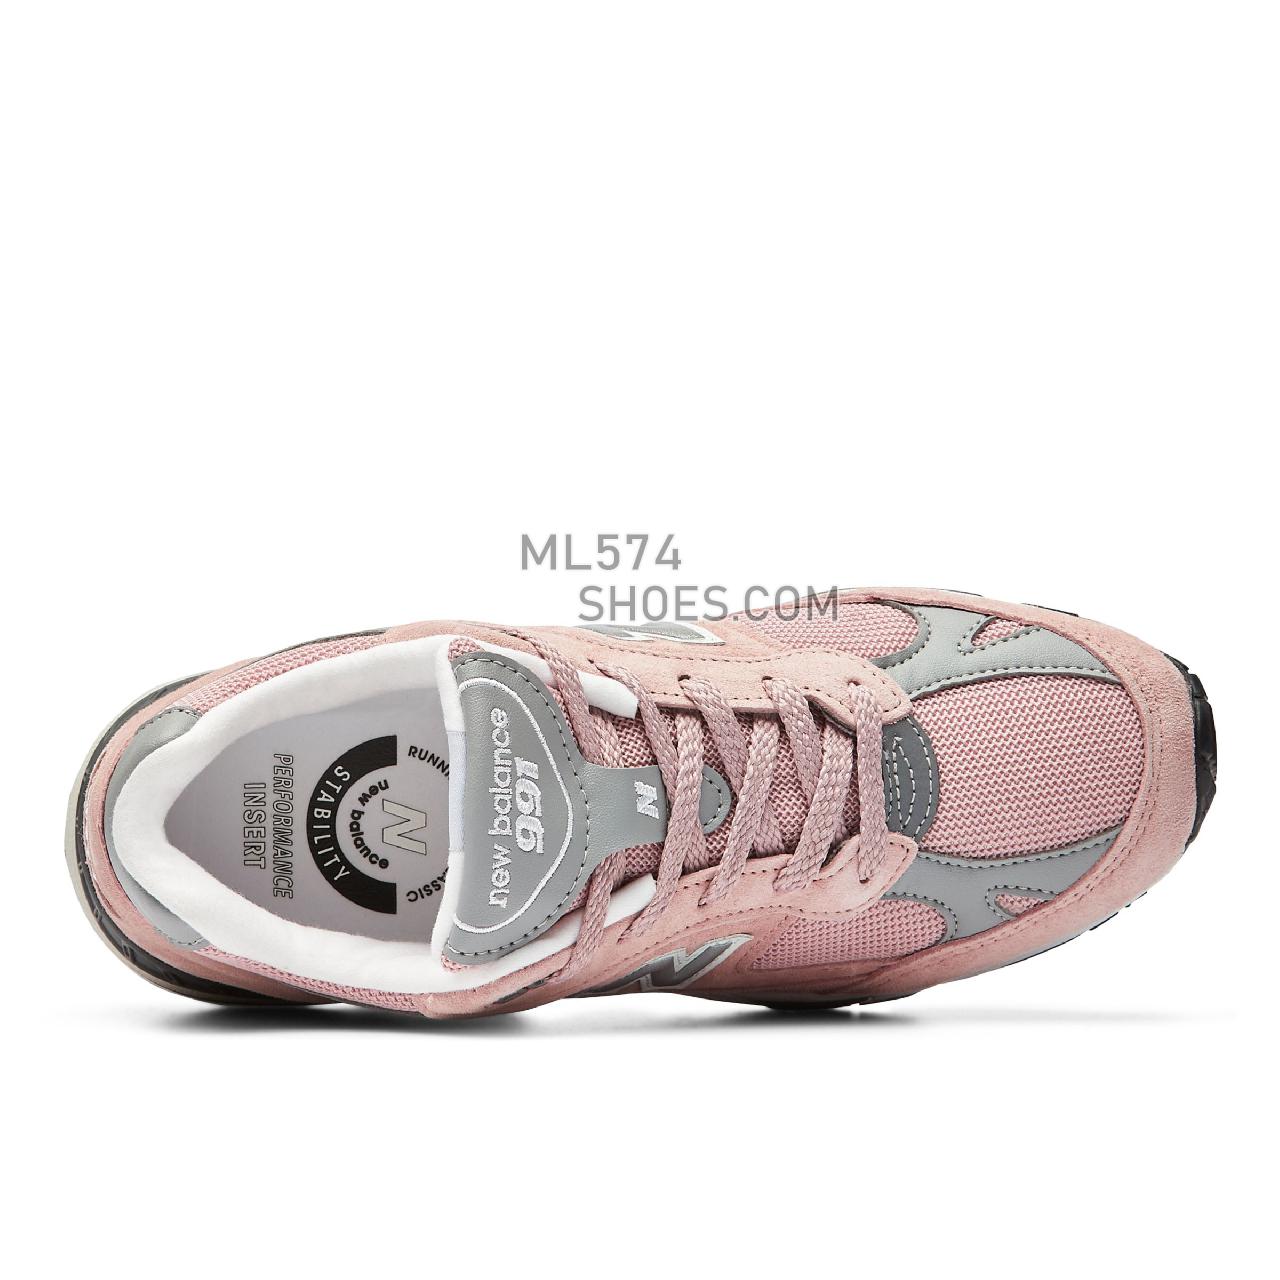 New Balance Made in UK 991 - Women's Made in USA And UK Sneakers - Pink with Grey and White - W991PNK